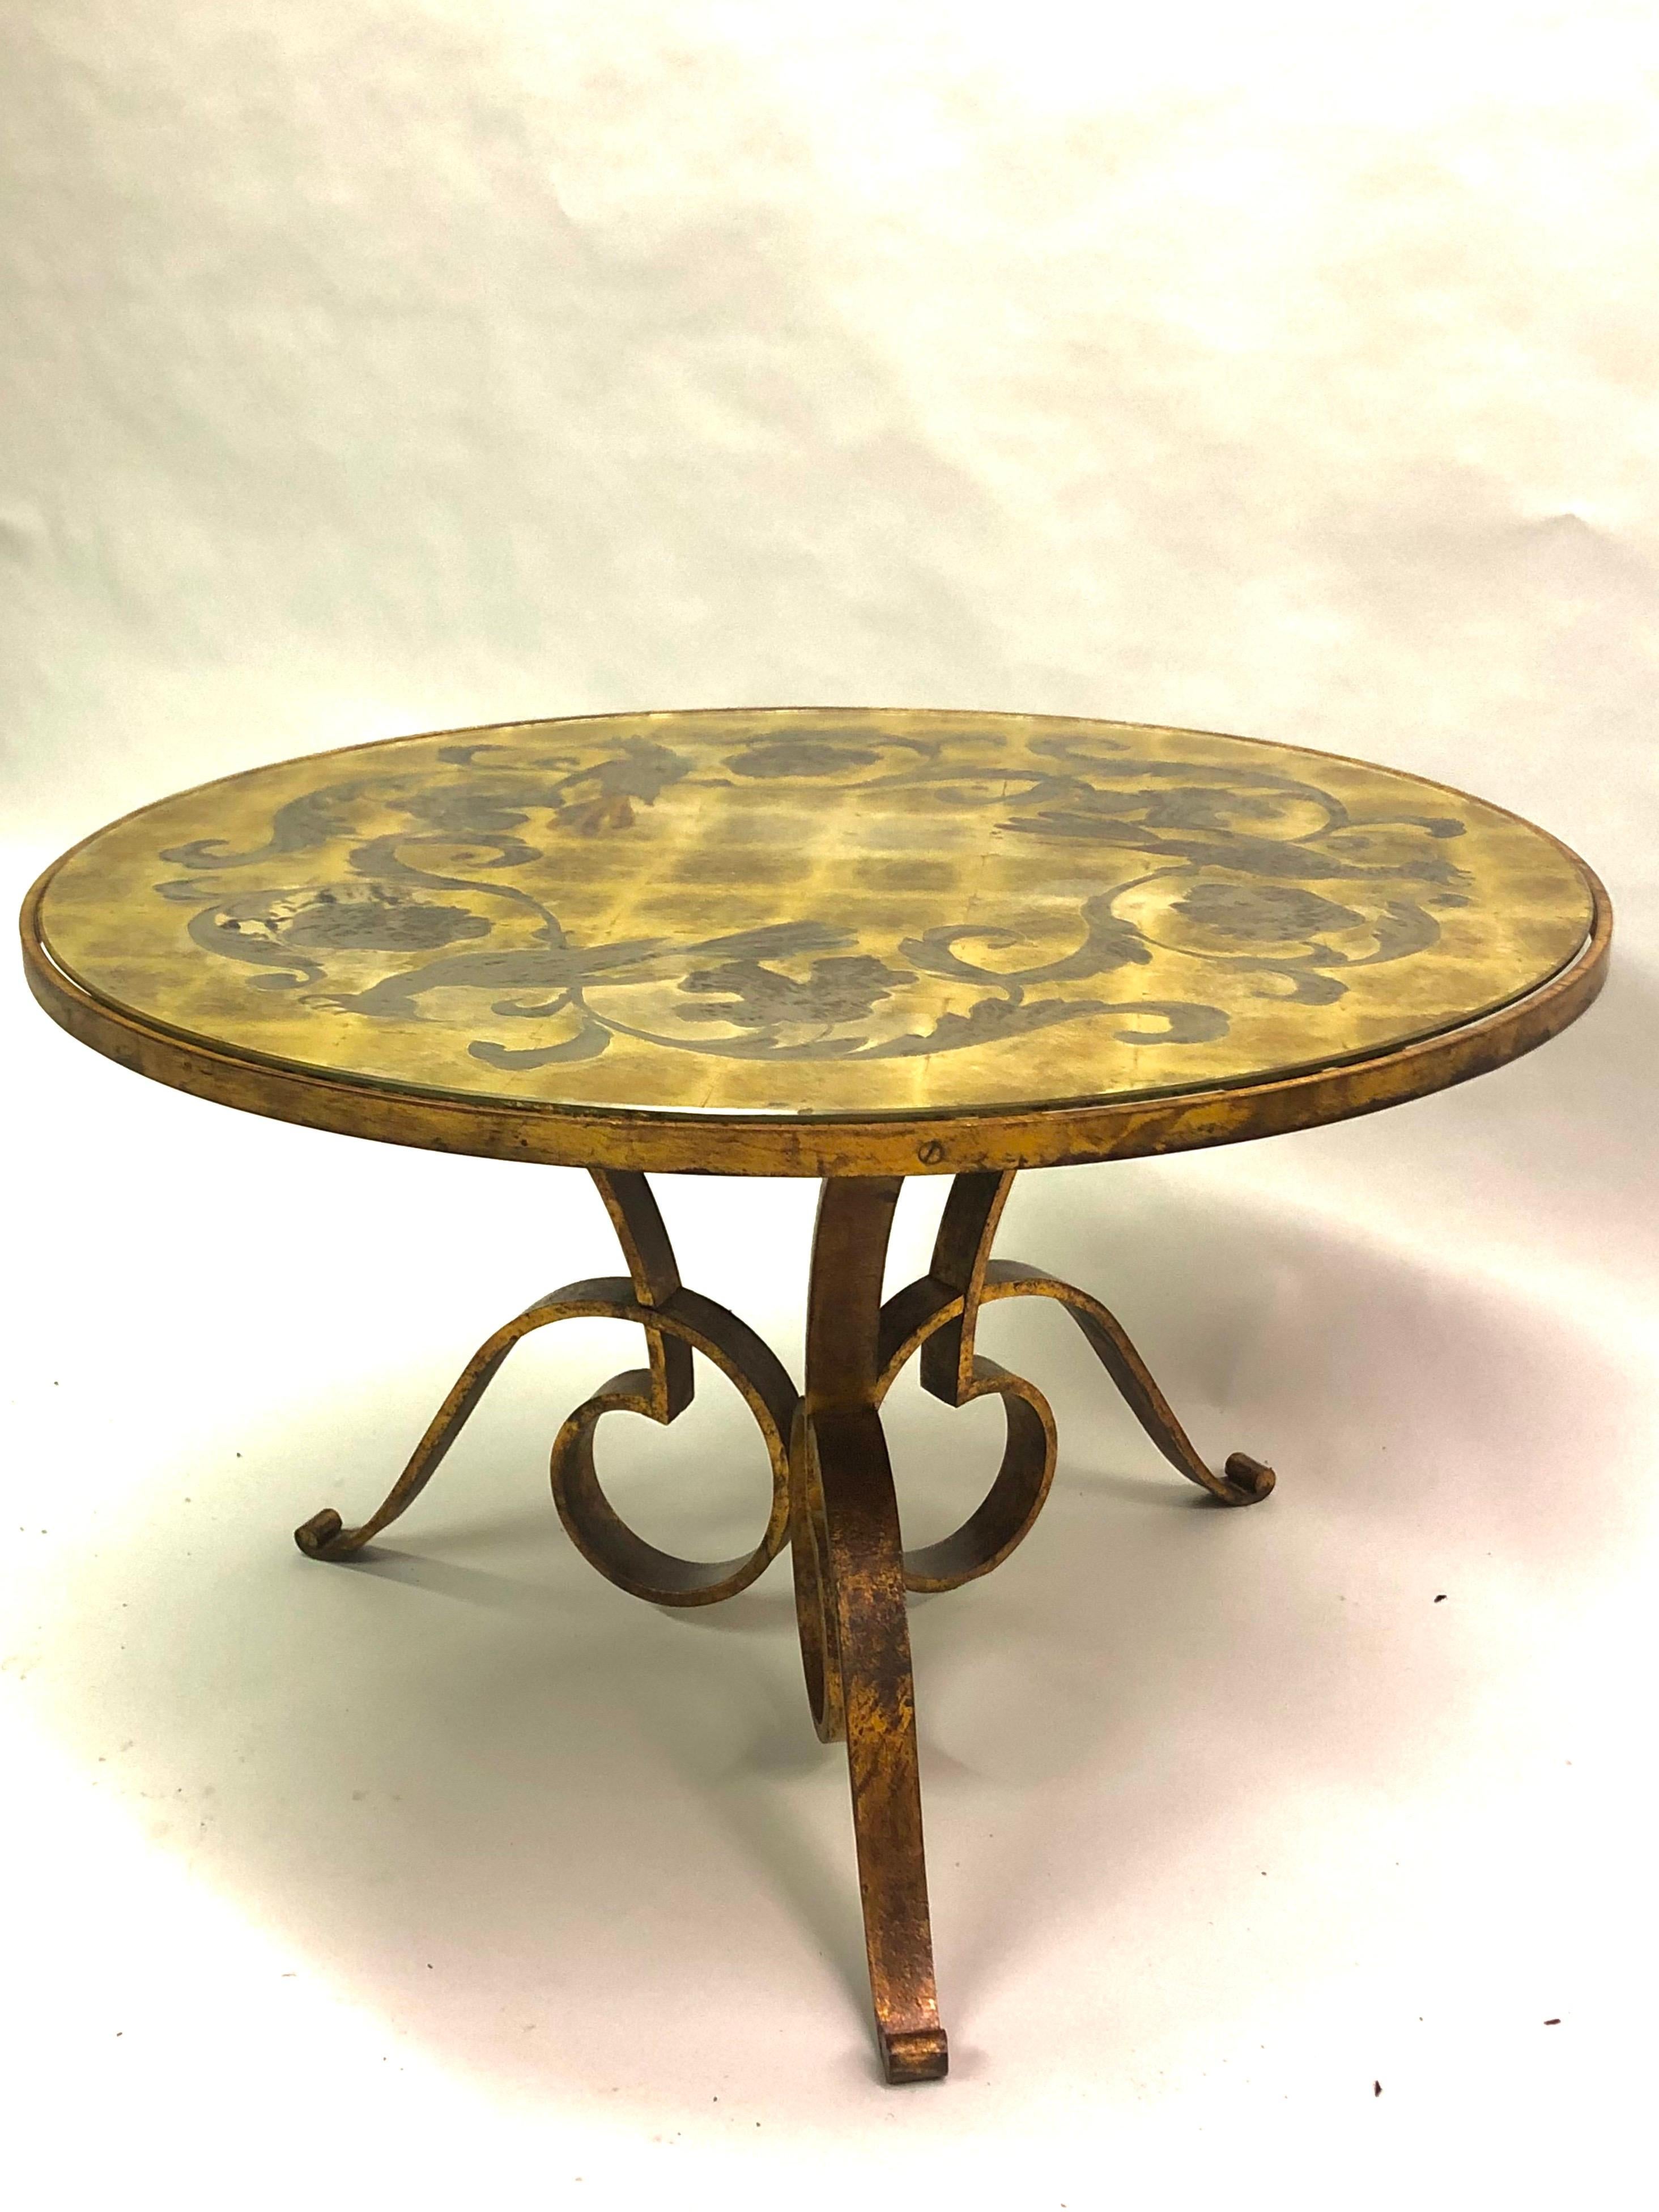 An Iconic French Mid-Century Modern Neoclassical gilt wrought iron round cocktail table or side / end table by Rene Drouet, France, 1940. The piece has an enchanting form with dynamic, lyrical curves The poetic tripod form base is in gilt hand